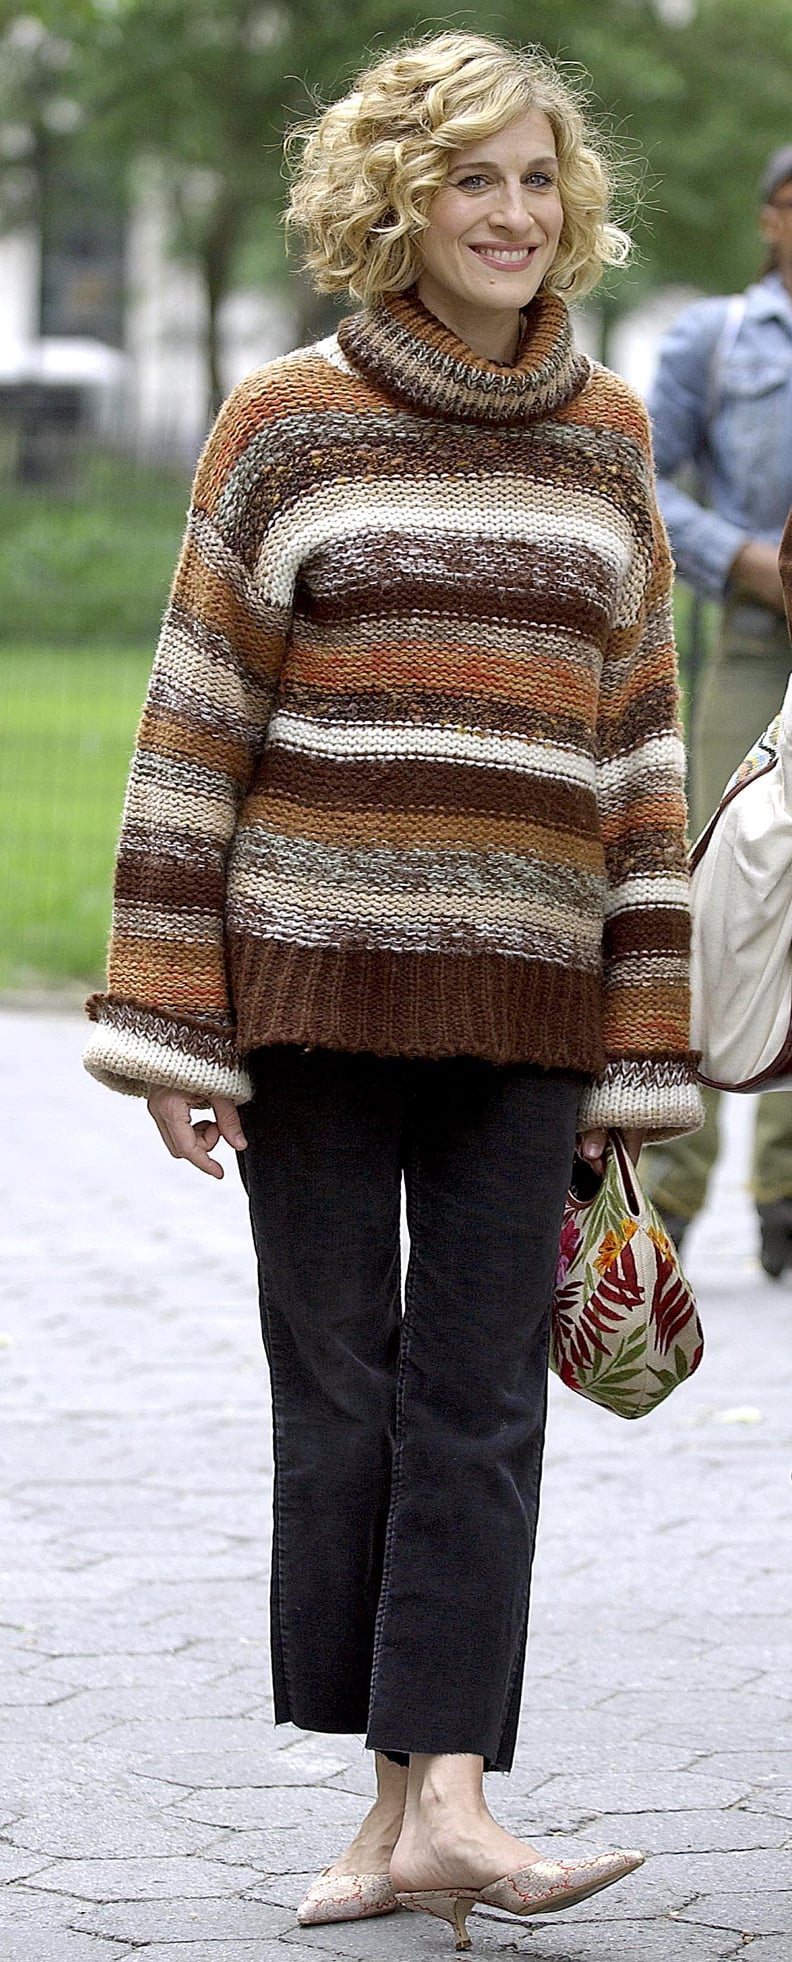 An Oversize Knit Doesn't Have to Feel Bulky